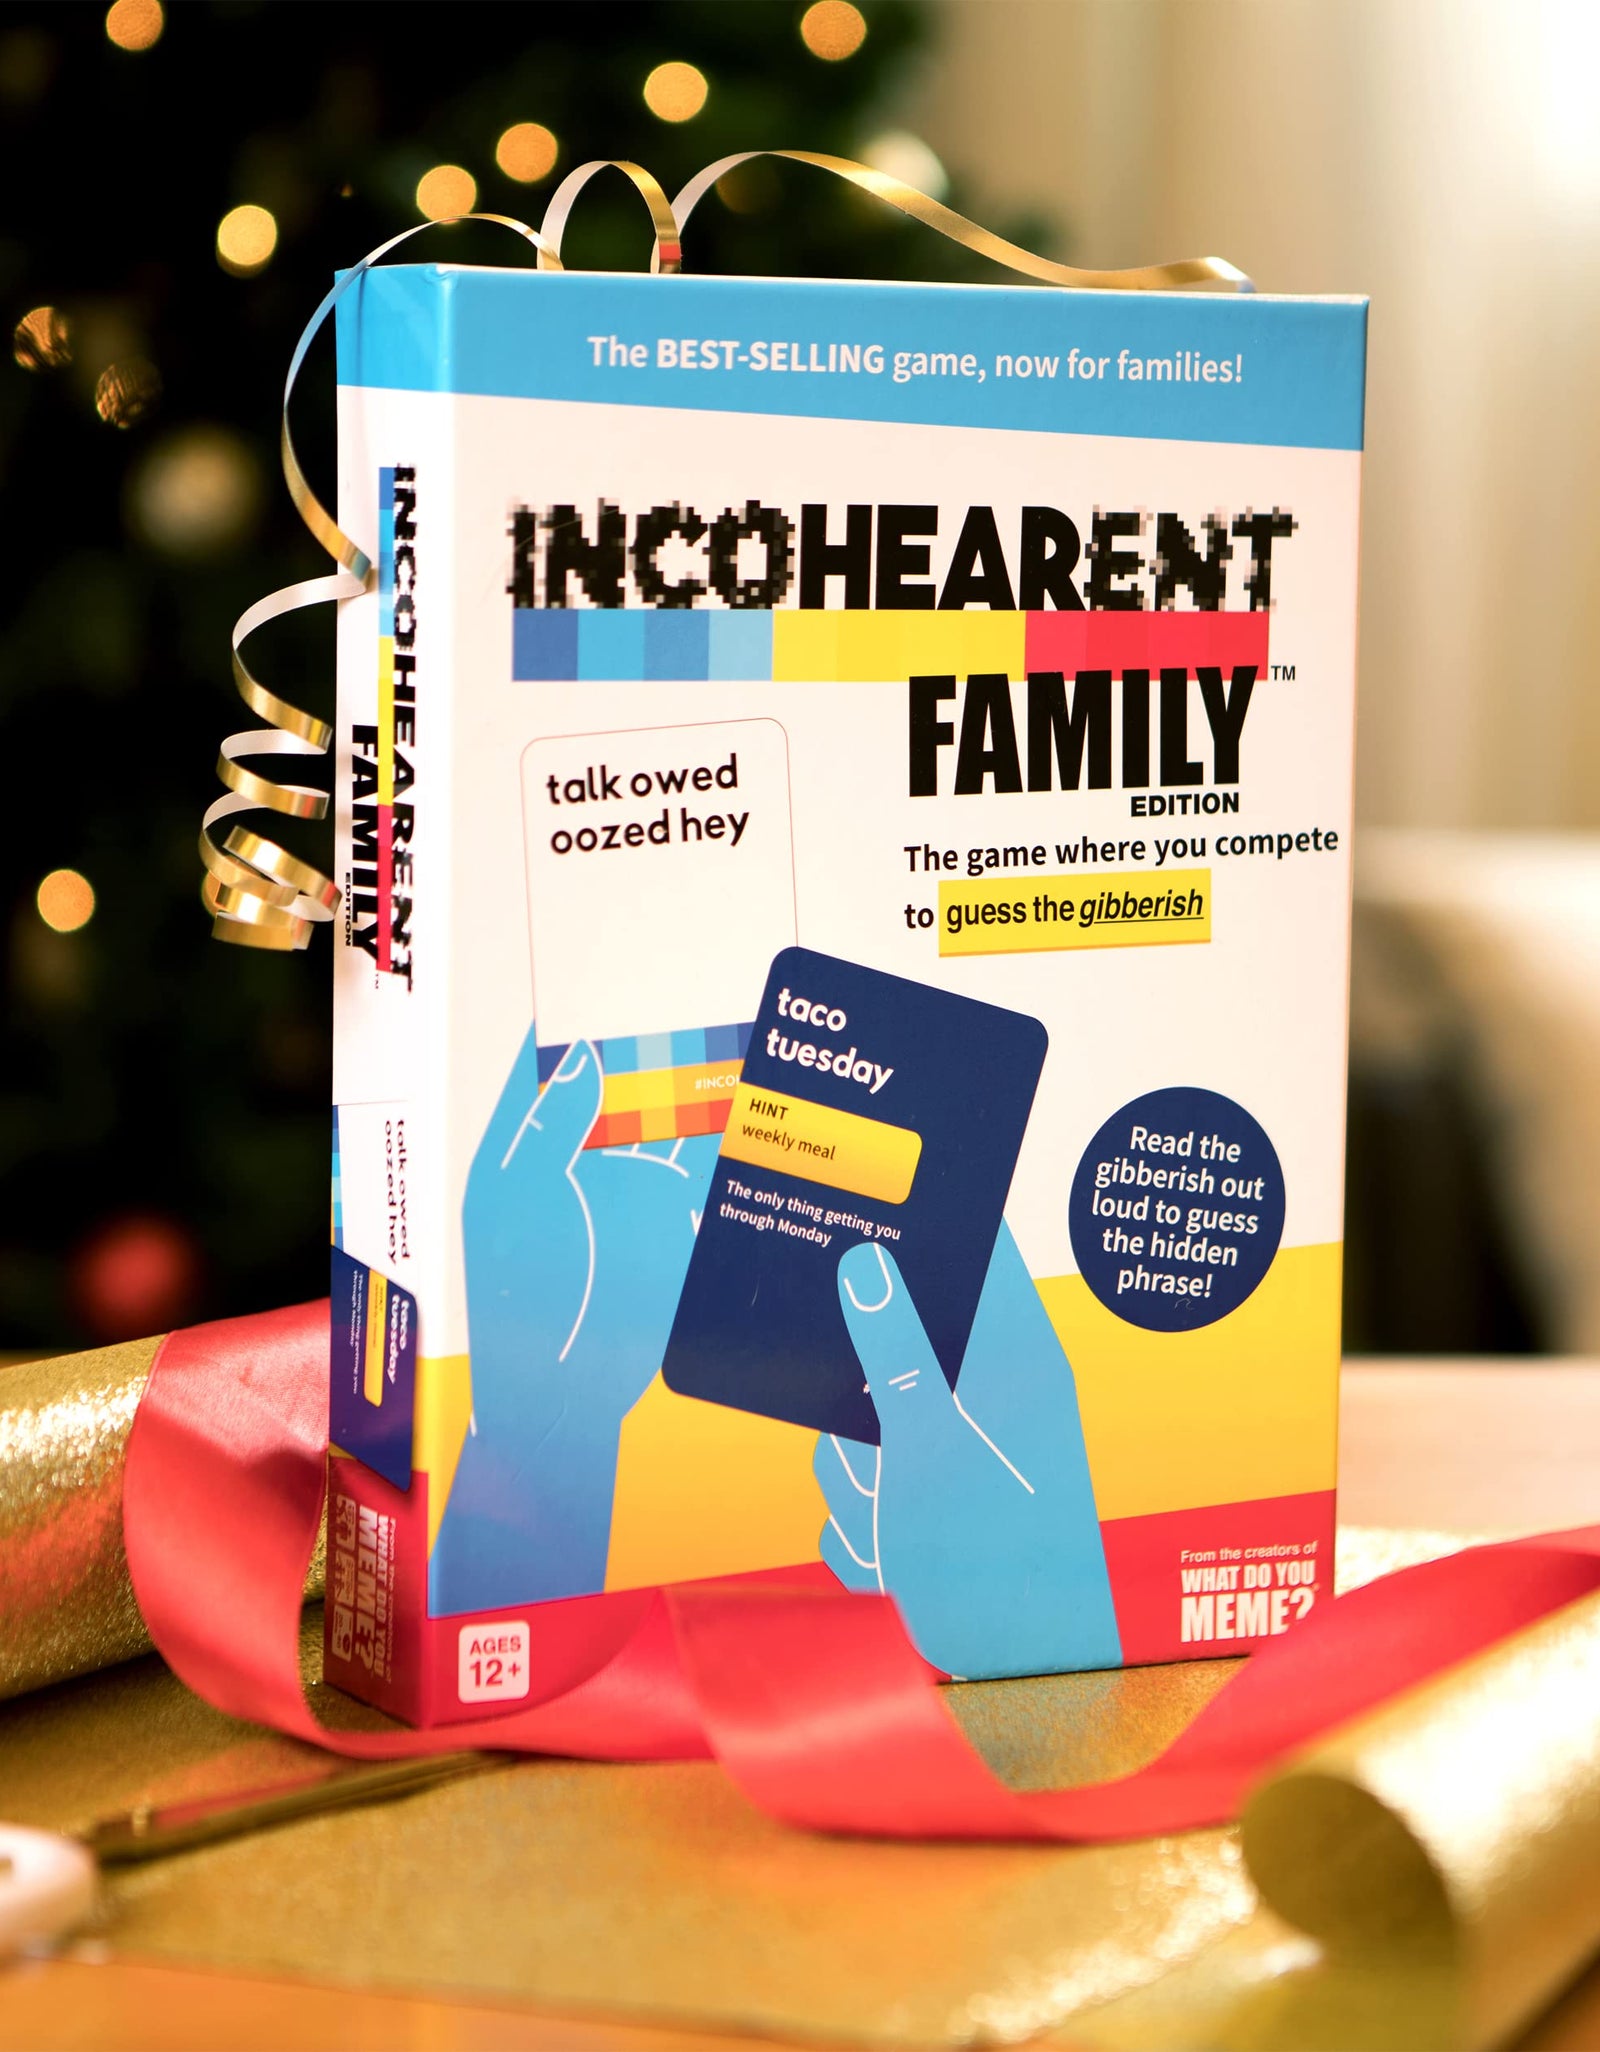 Incohearent Family Edition - The Family Game Where You Compete to Guess The Gibberish - by What Do You Meme? Family